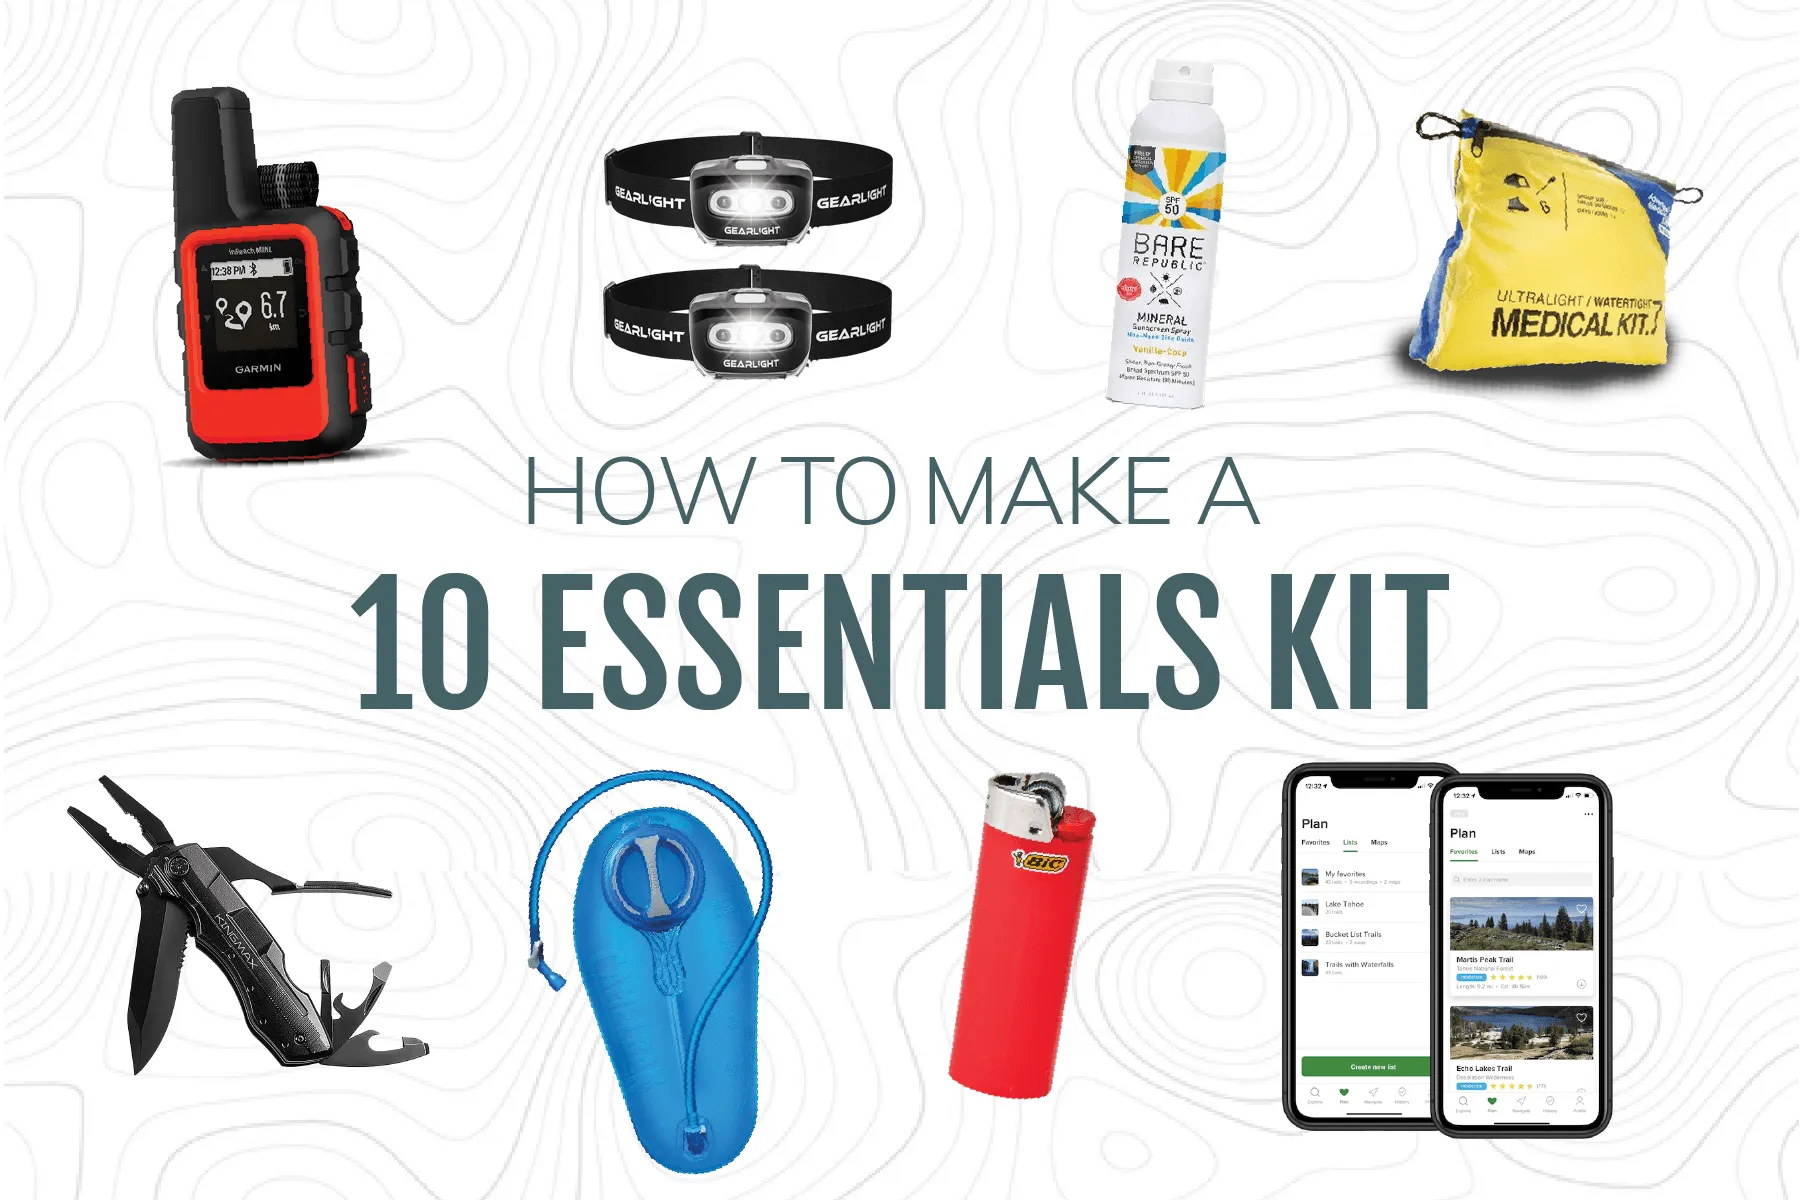 How to Make a 10 Essentials Kit